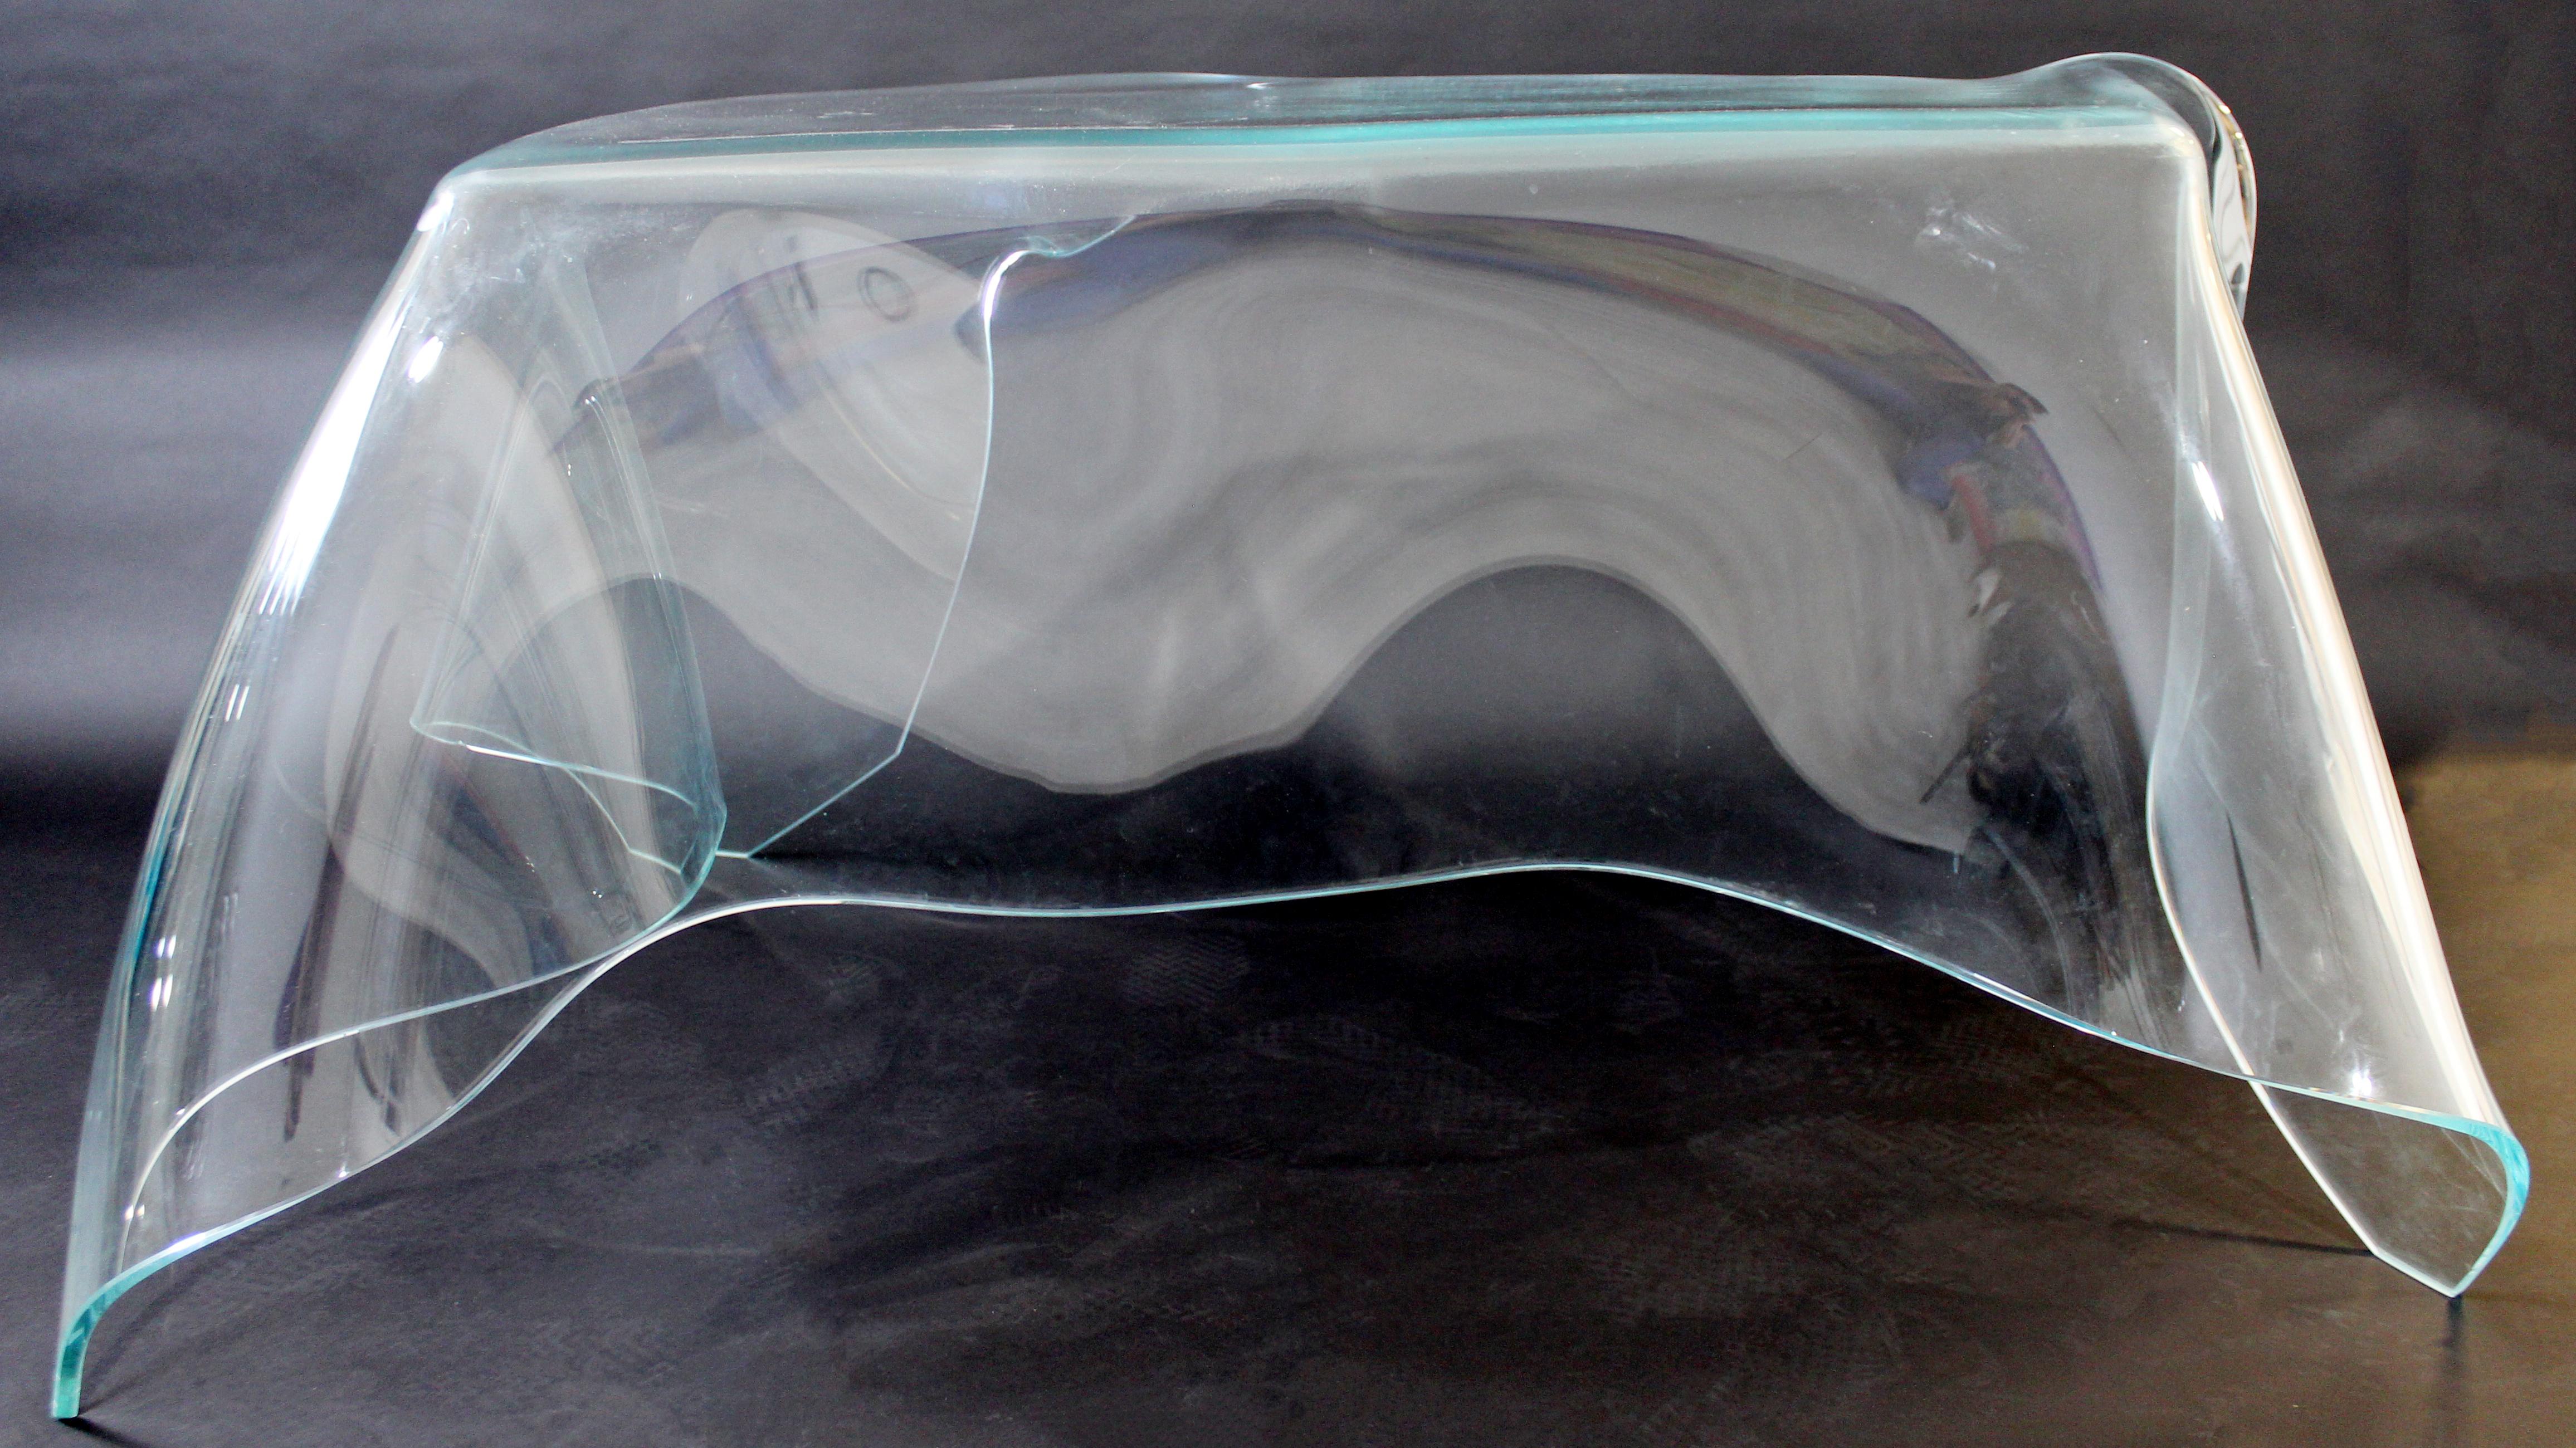 For your consideration is an simply show stopping piece of art in the shape of a slumped and draped glass desk. Made of a thick, clear sheet of glass that has been manipulated by the world renowned glass artist, Laurel Fyfe, circa 1980s. In very